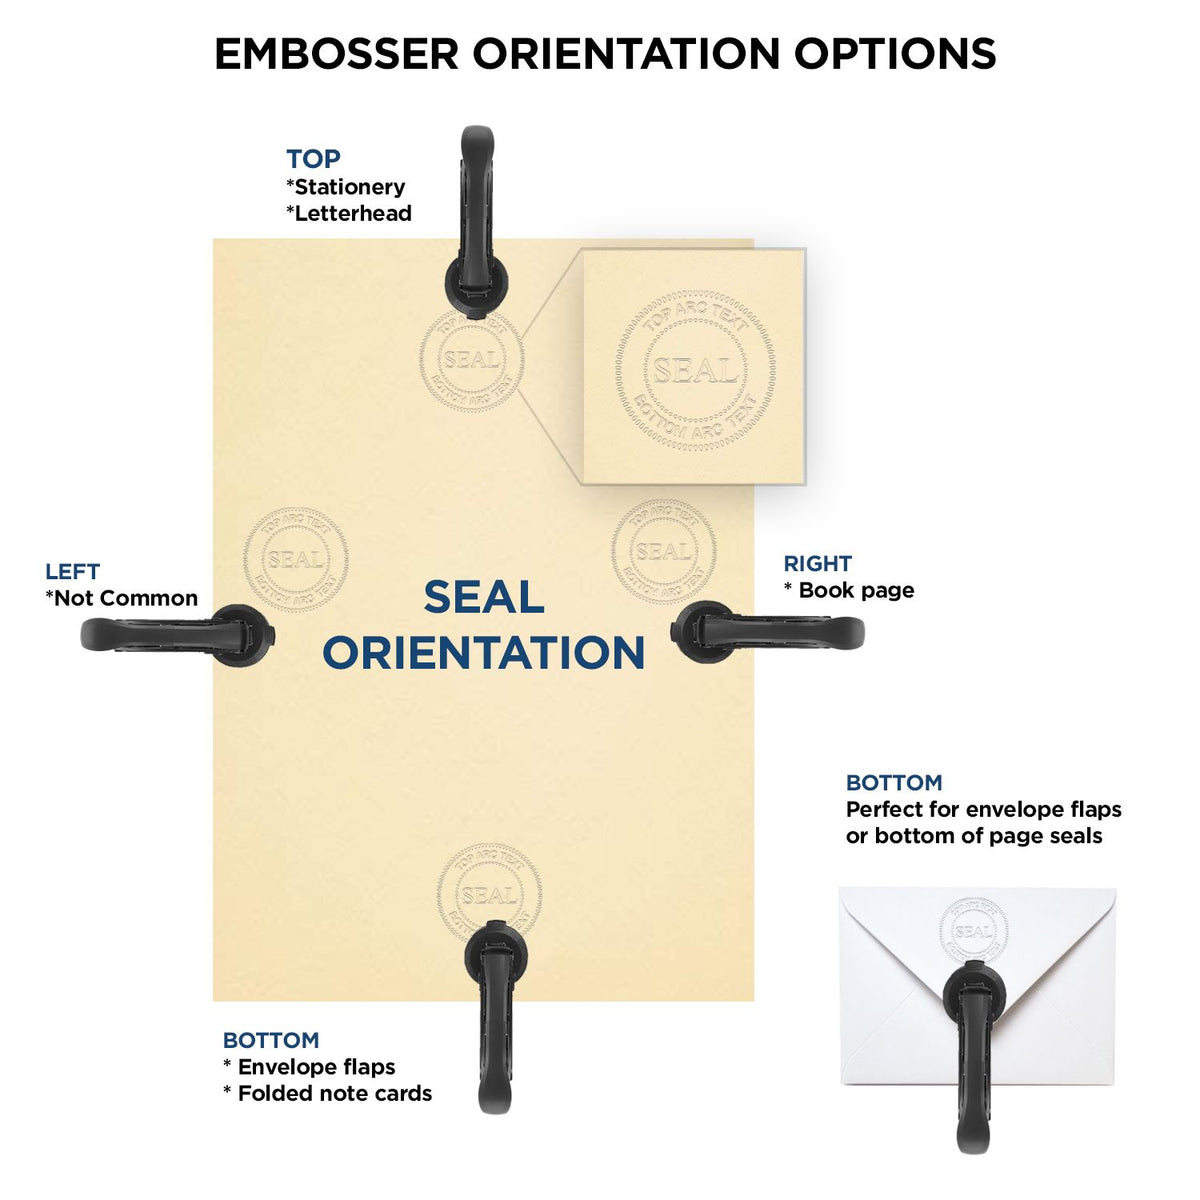 An infographic for the Handheld Missouri Professional Geologist Embosser showing embosser orientation, this is showing examples of a top, bottom, right and left insert.